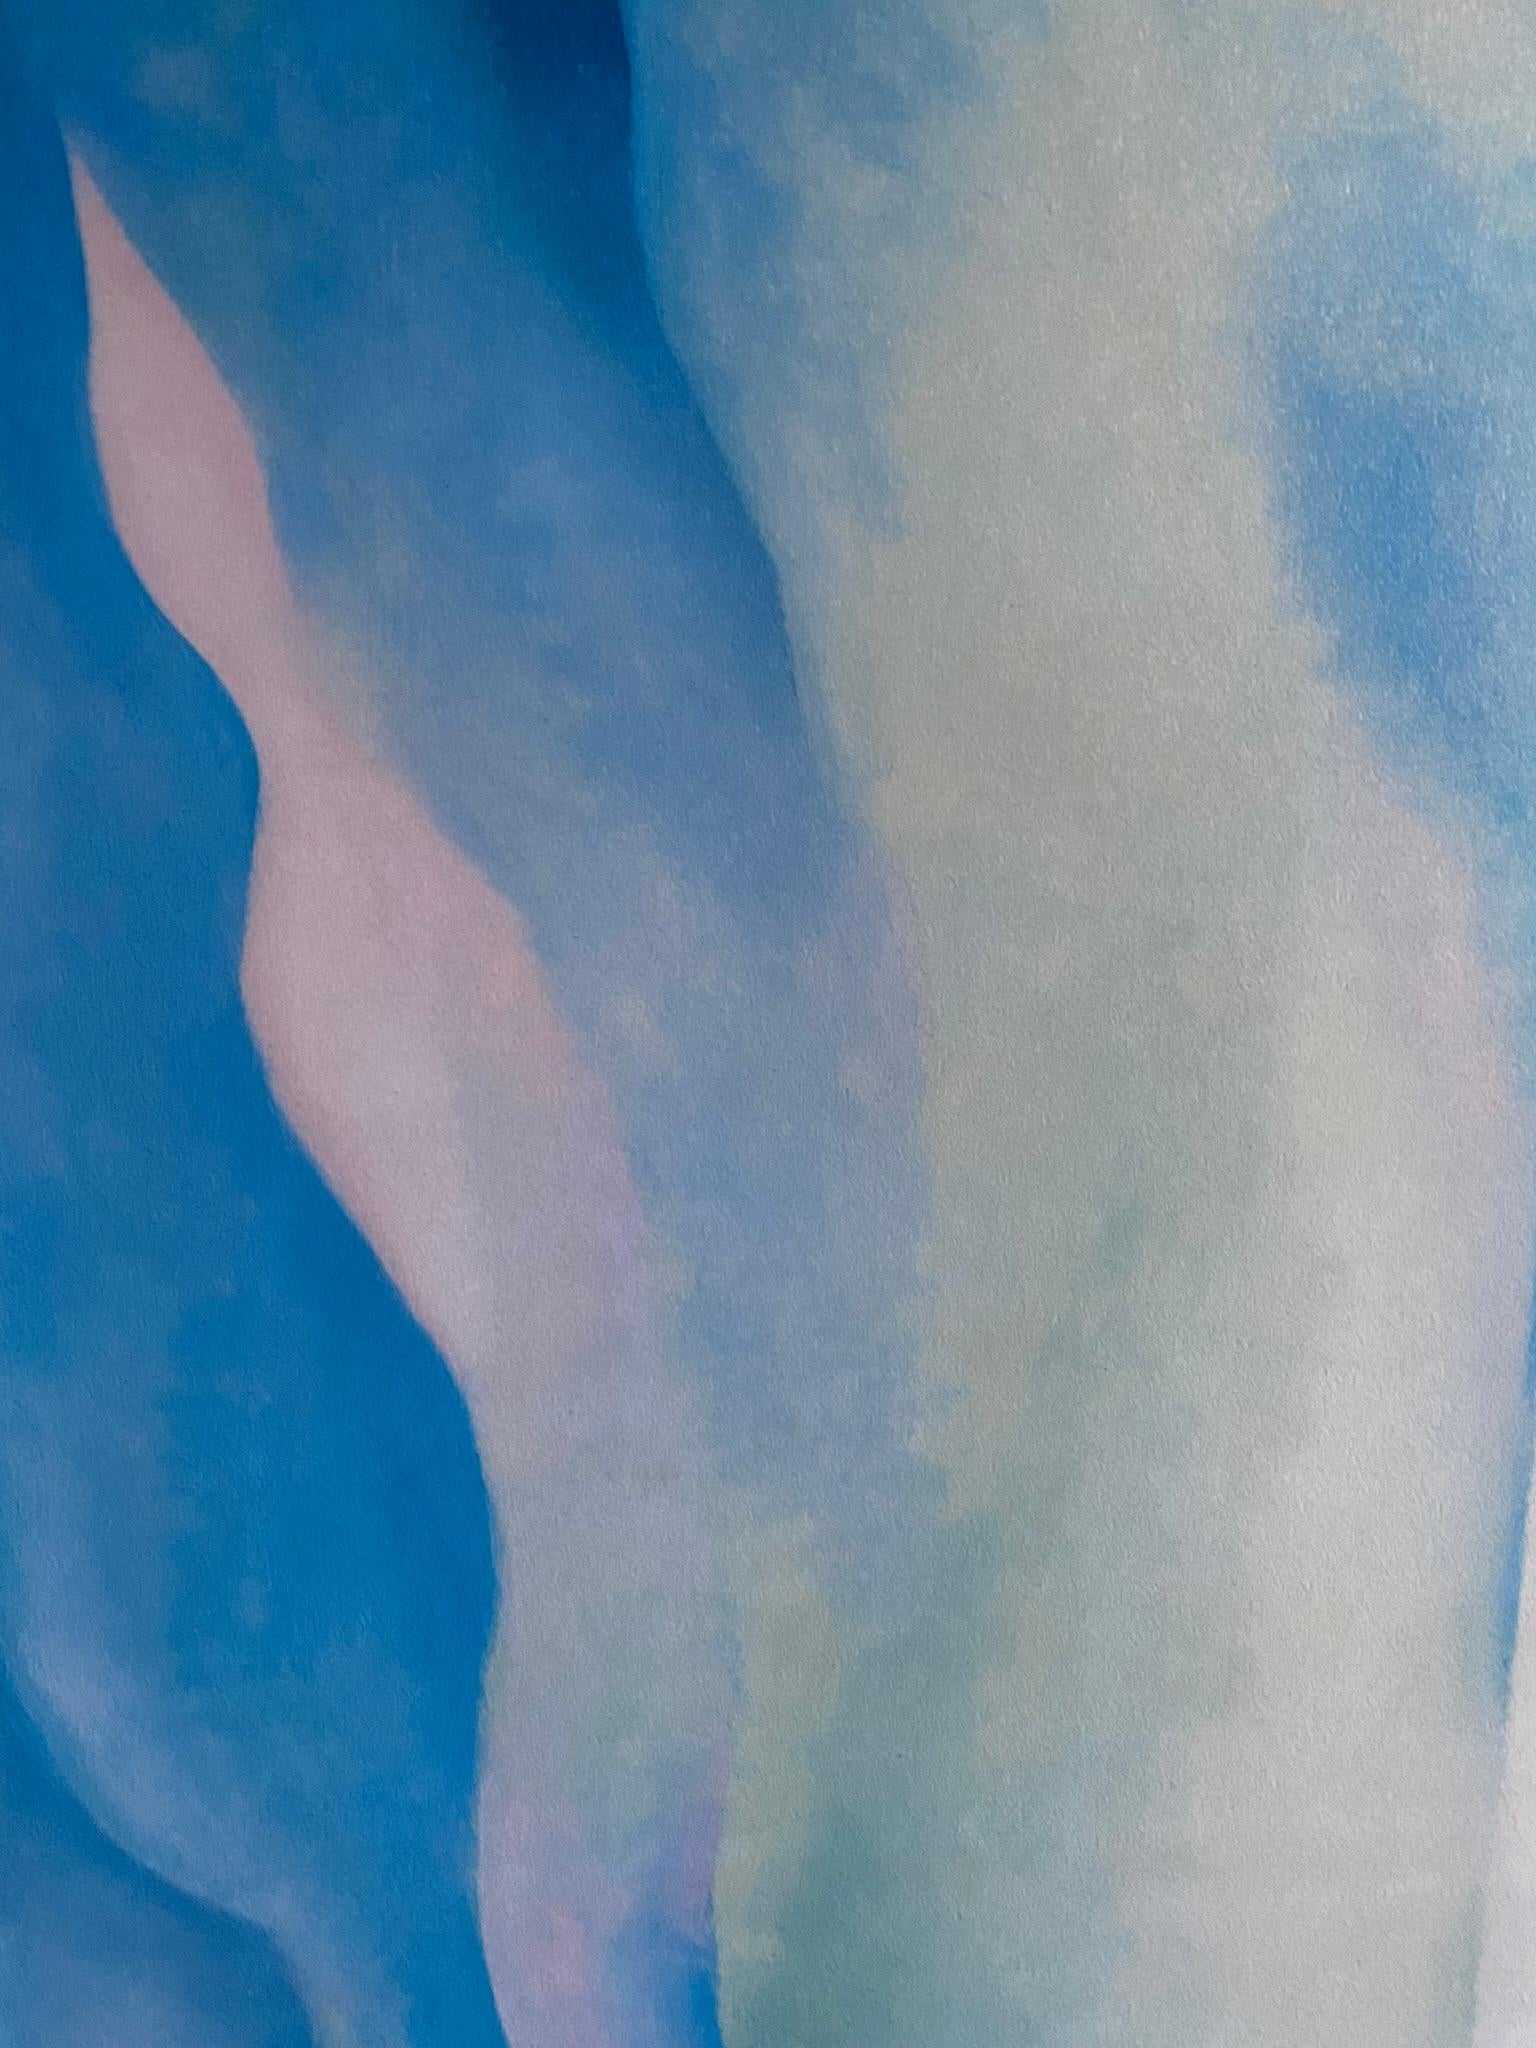 Georgia O'Keeffe-High Quality print by MoMA circa1997-Abstraction Blue-GSYStudio For Sale 13